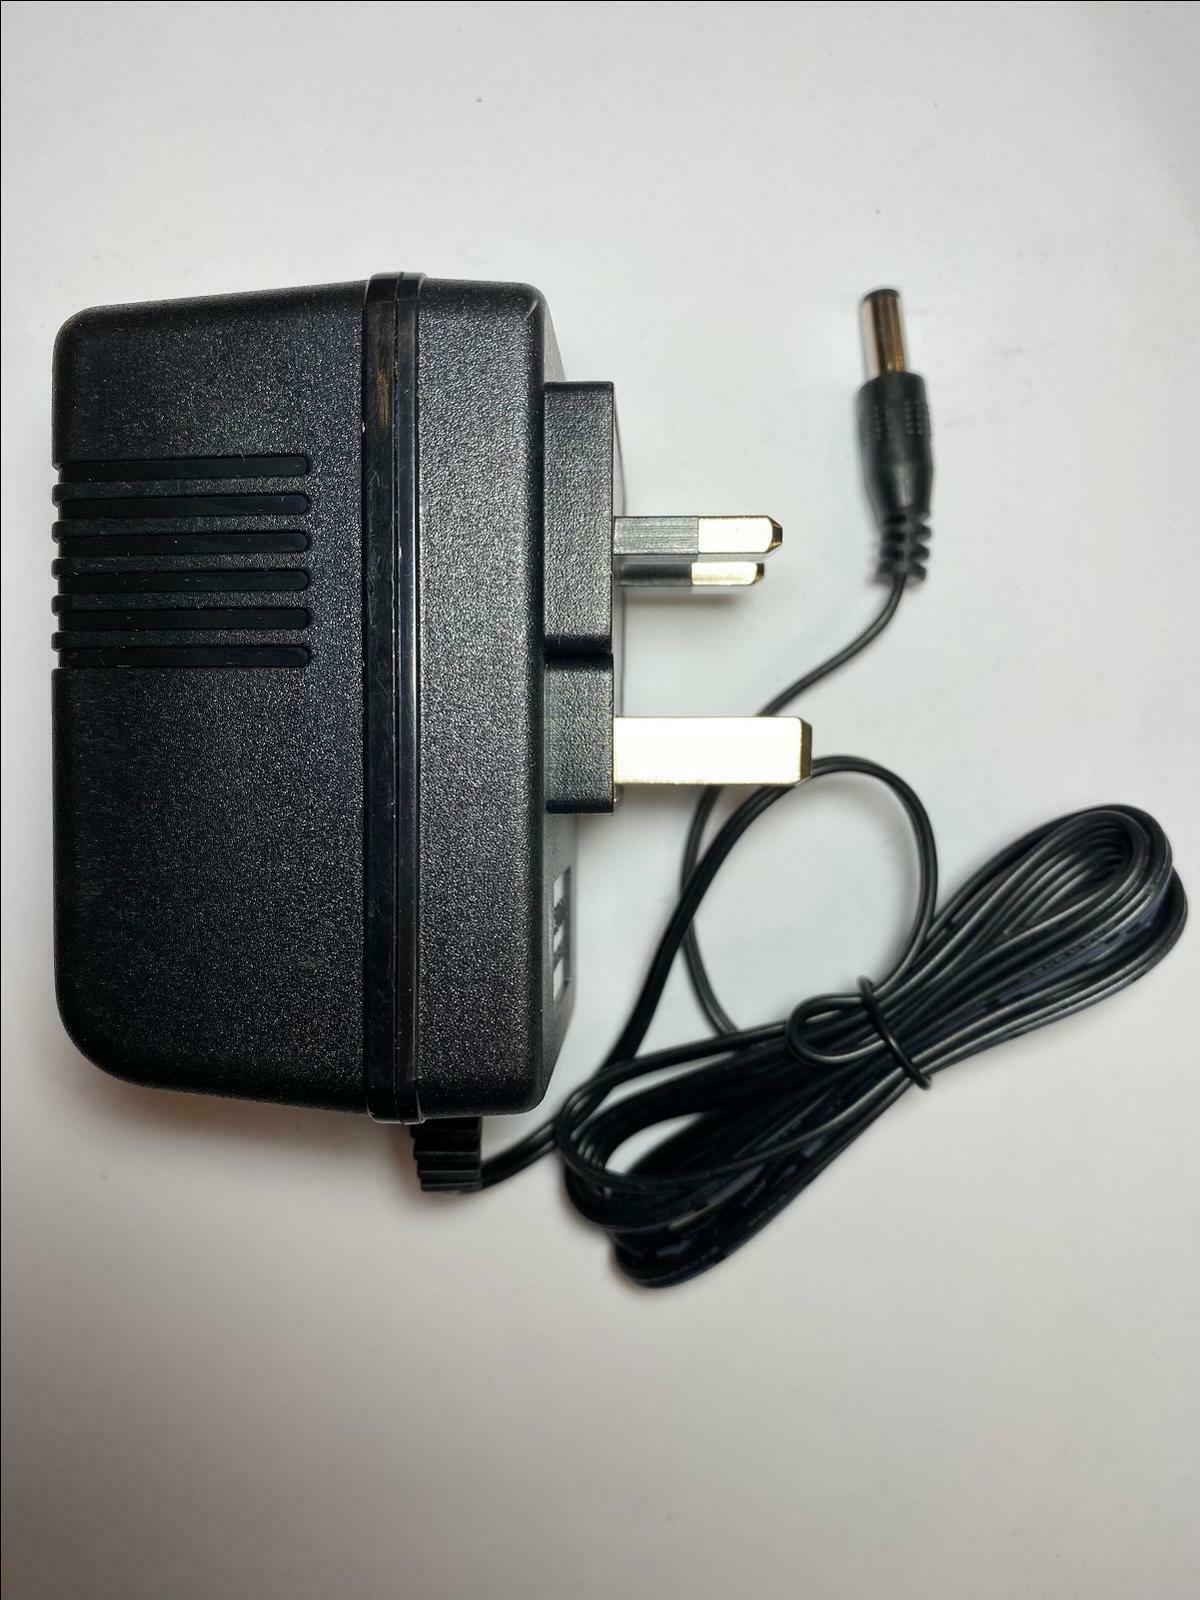 24W NEW GOODMANS GSCB2000S012V024 POWER SUPPLY ADAPTER 12V 2A GV101YRH32 GV101YRH50 Type: Adapter Connector A: 2.5 mm F - Click Image to Close